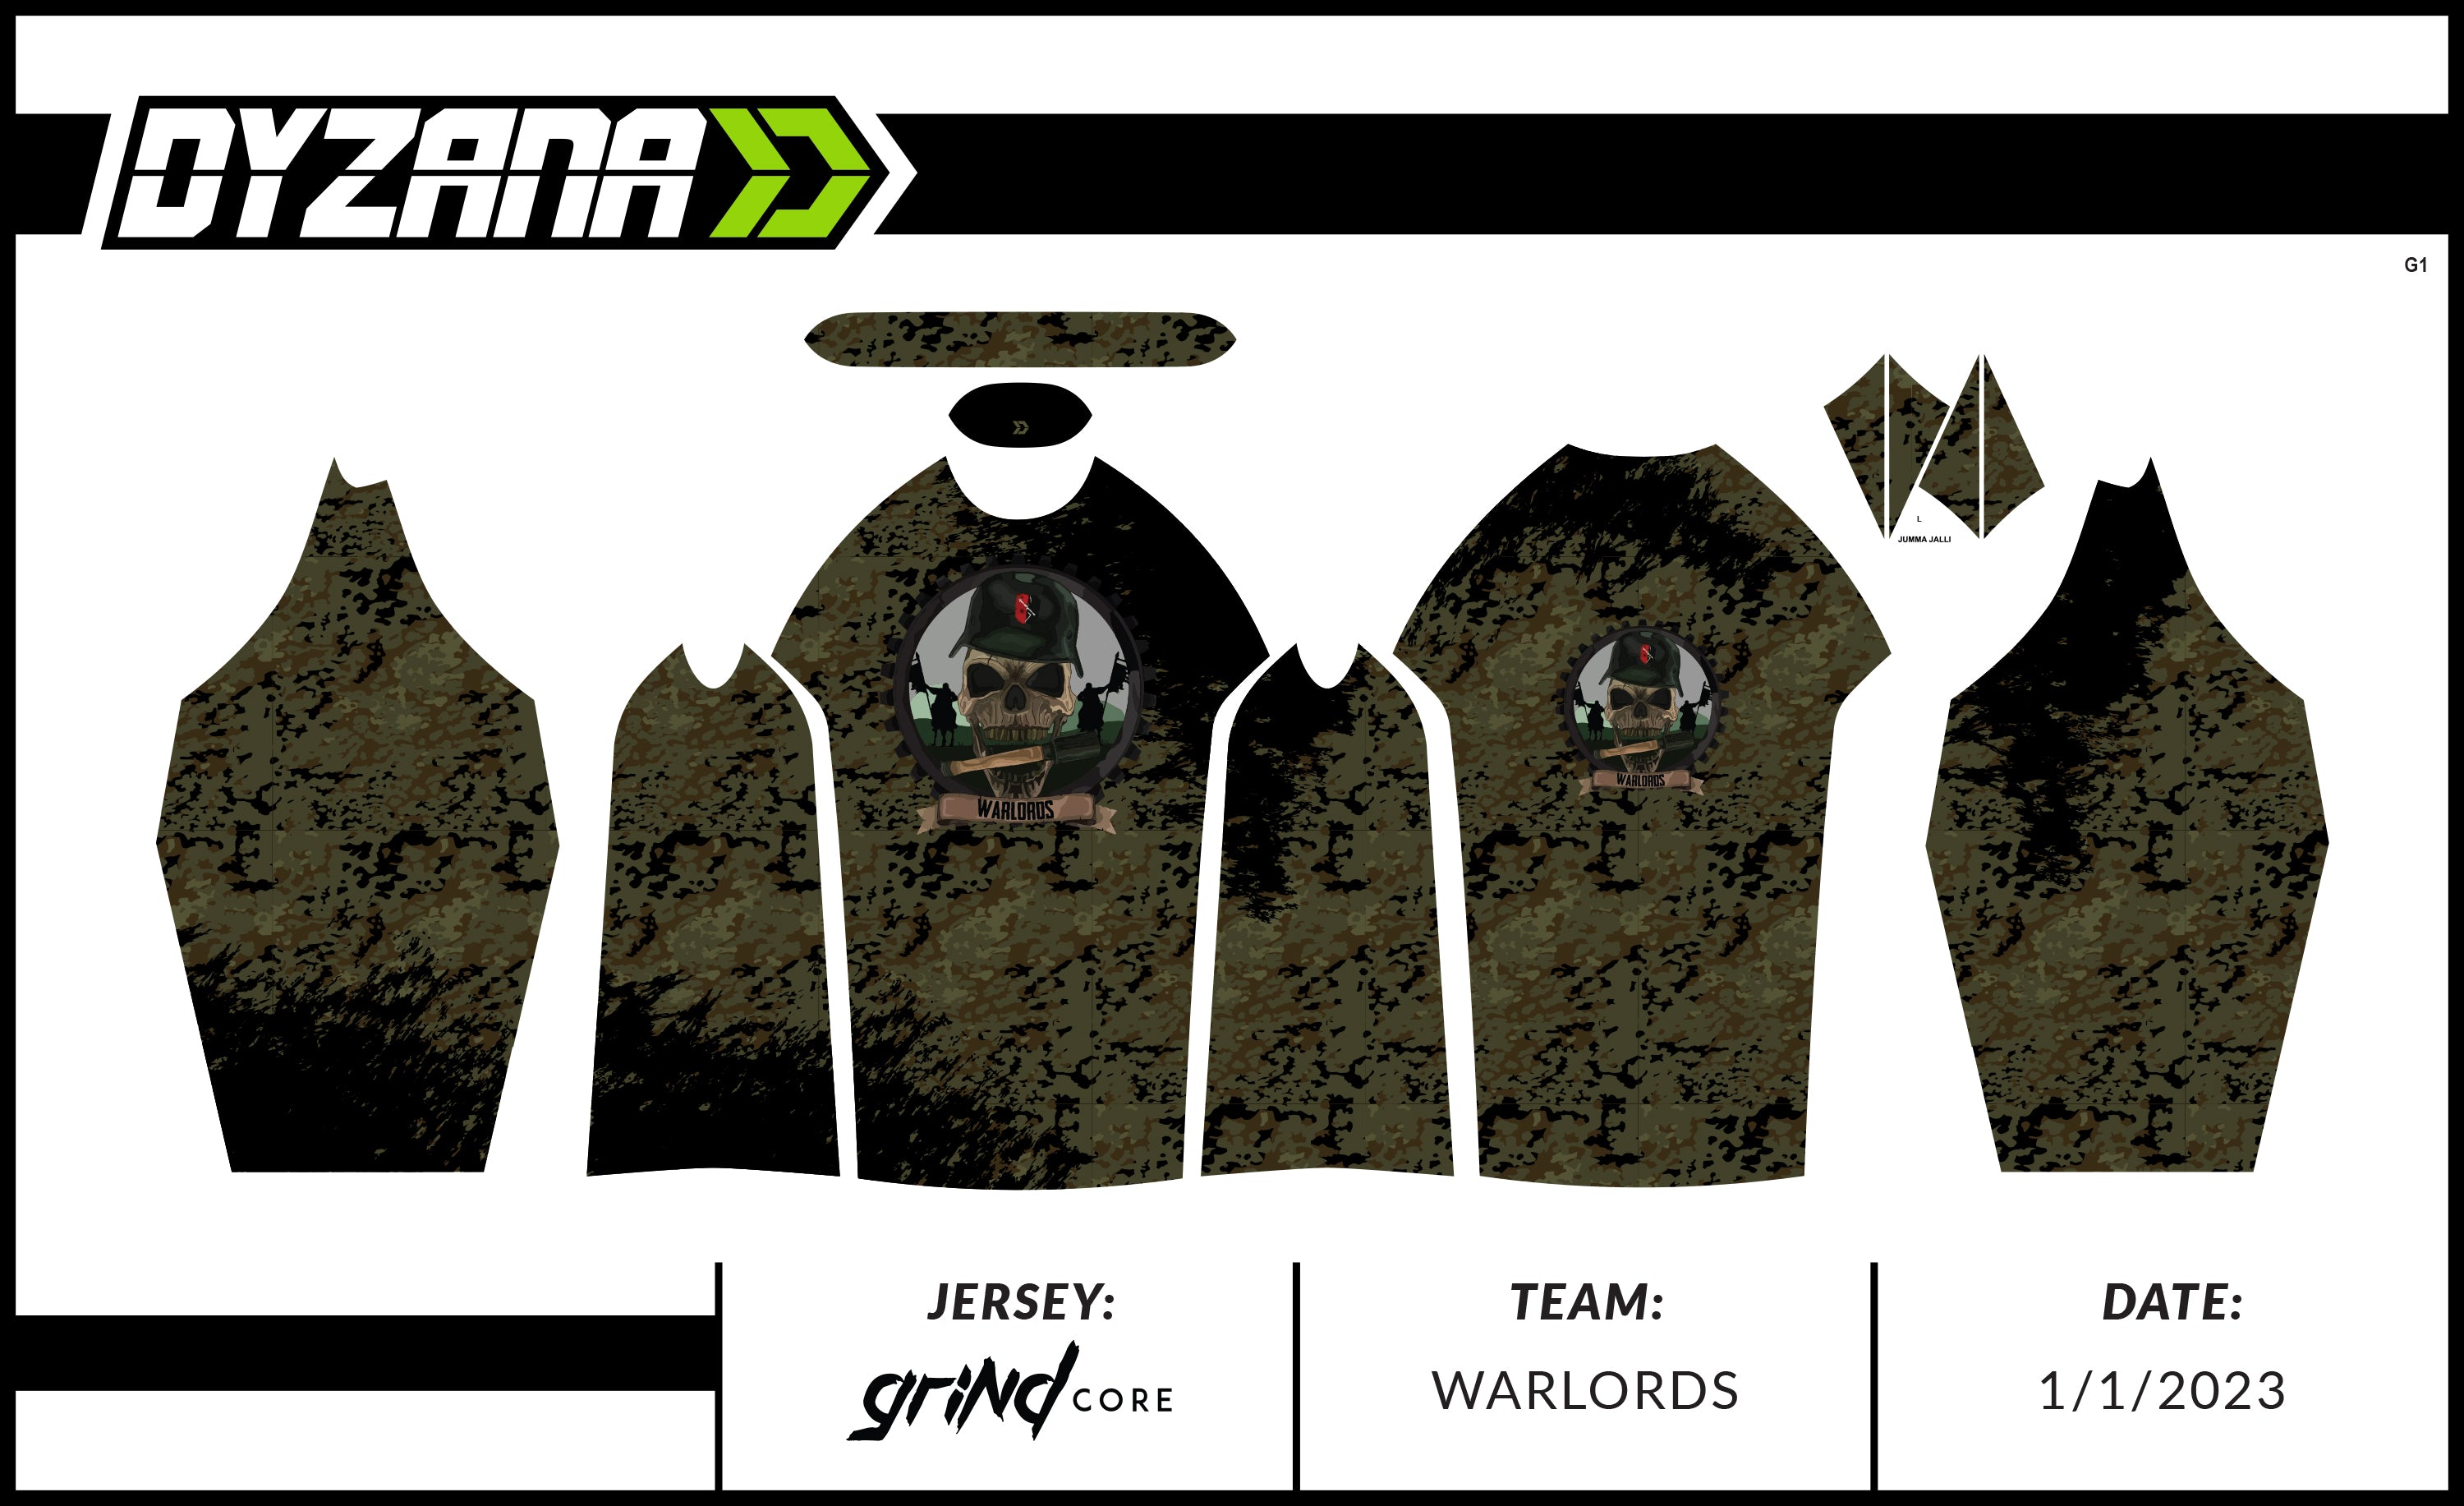 Warlords - Grind Core Jersey